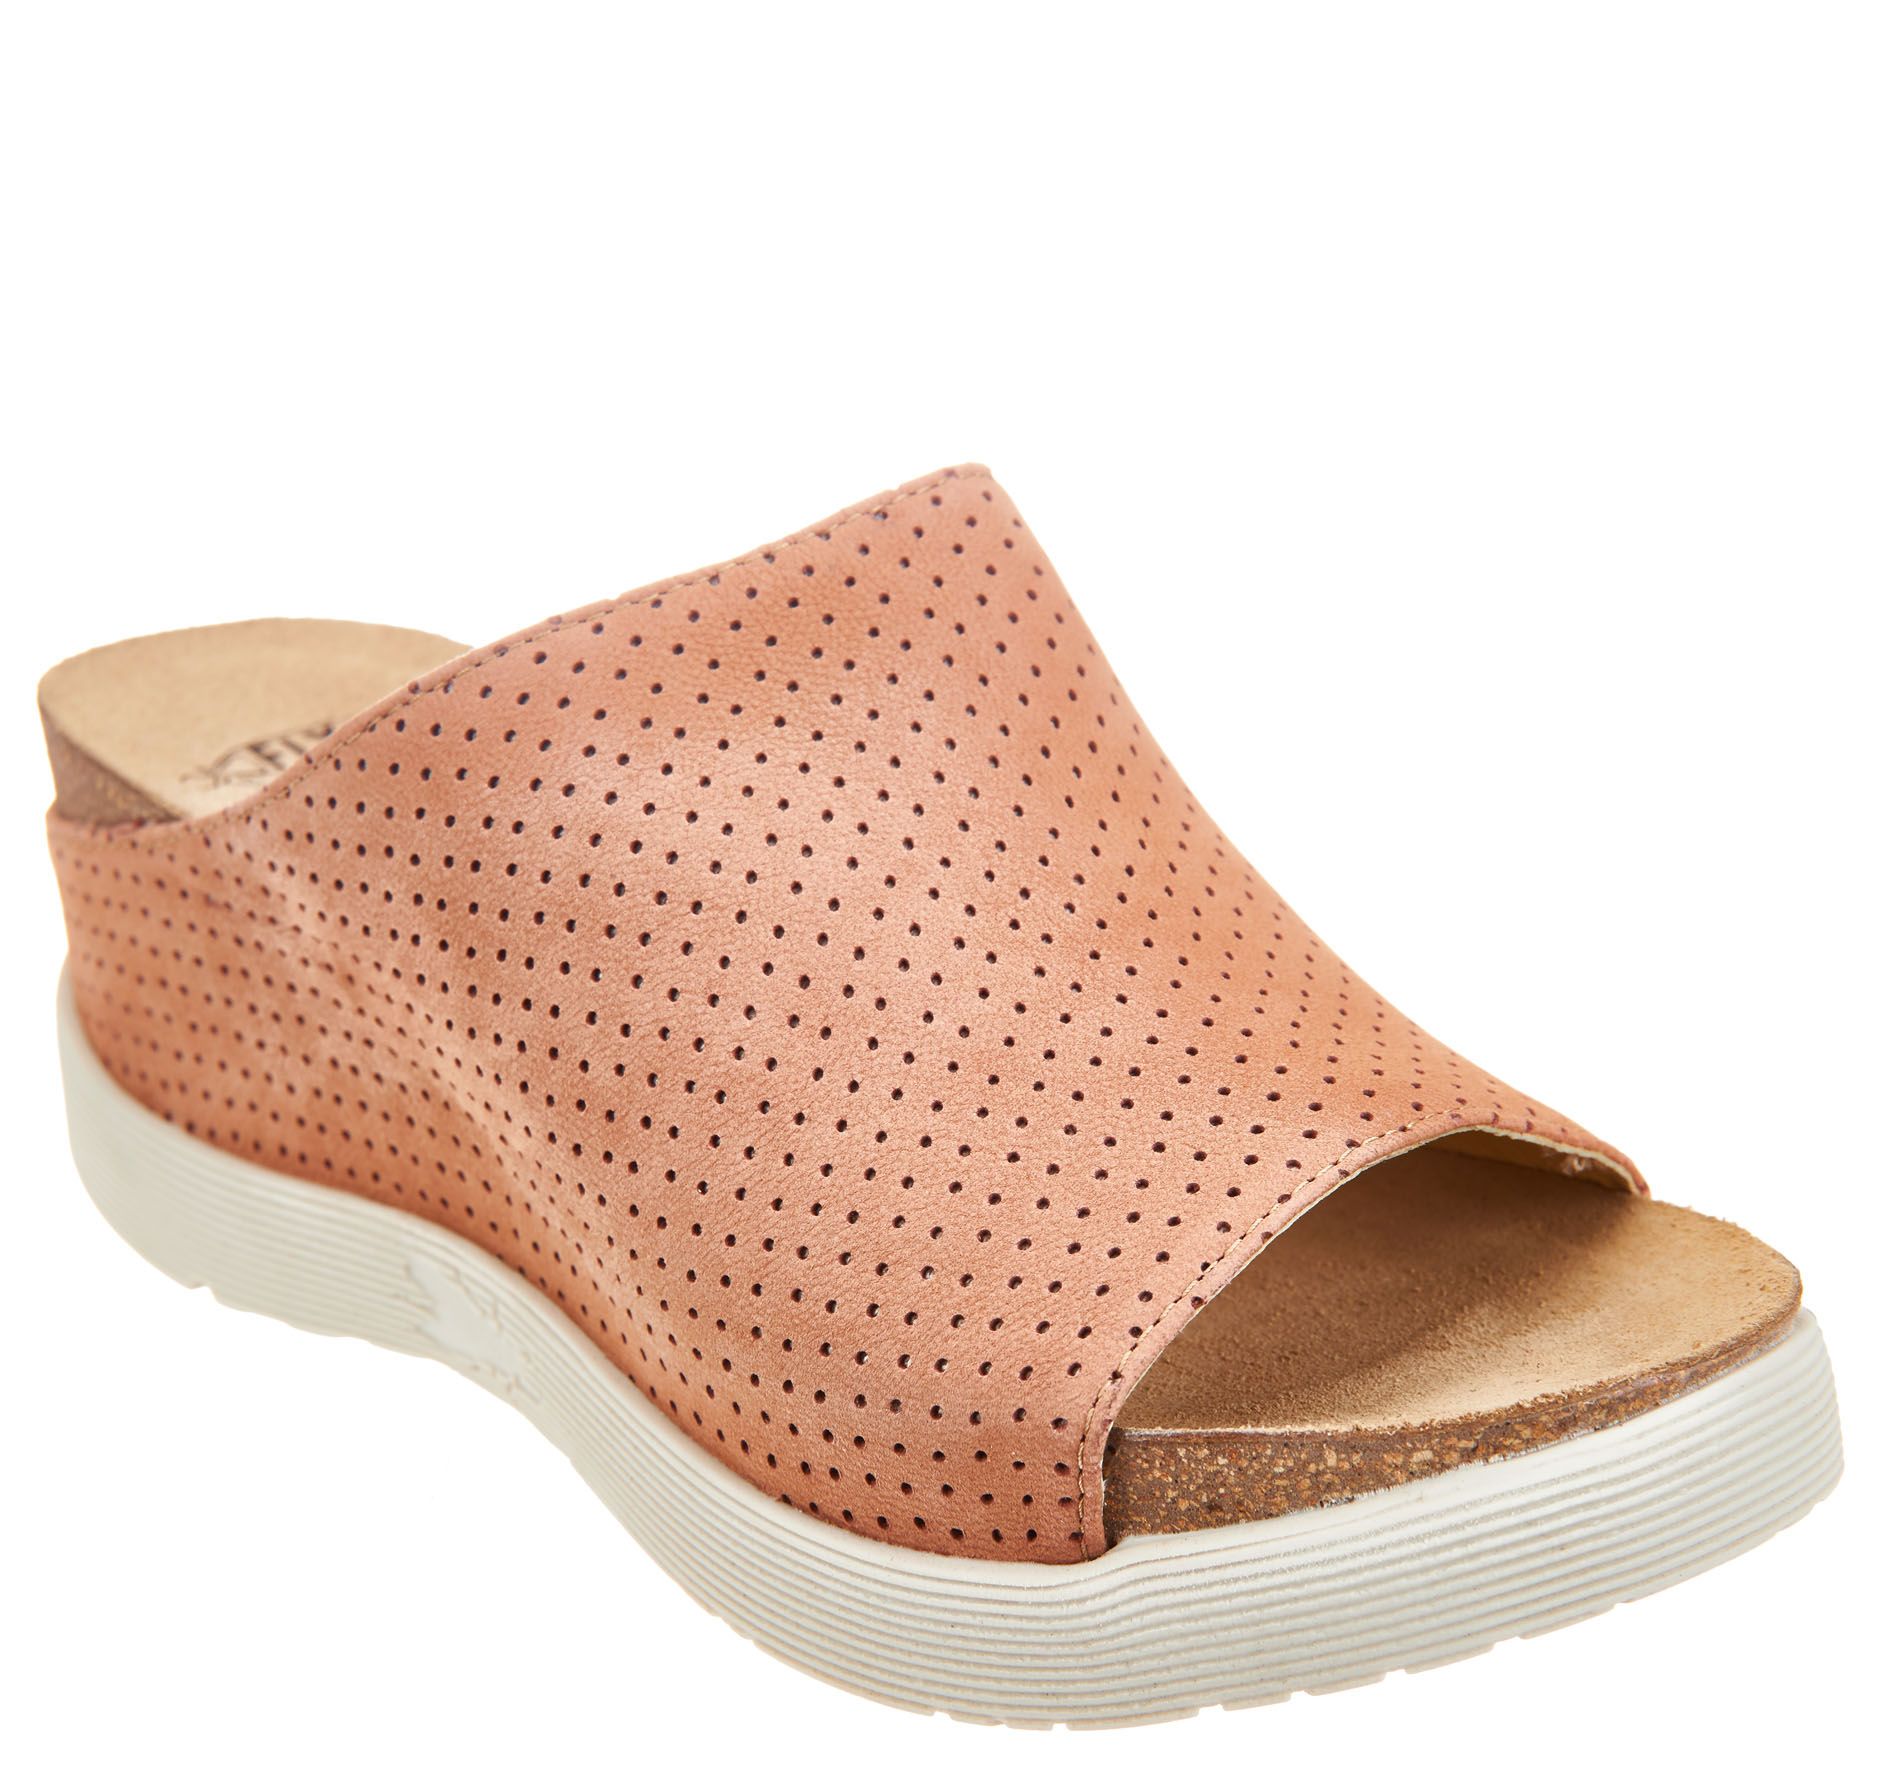 fly london perforated leather wedge sandals